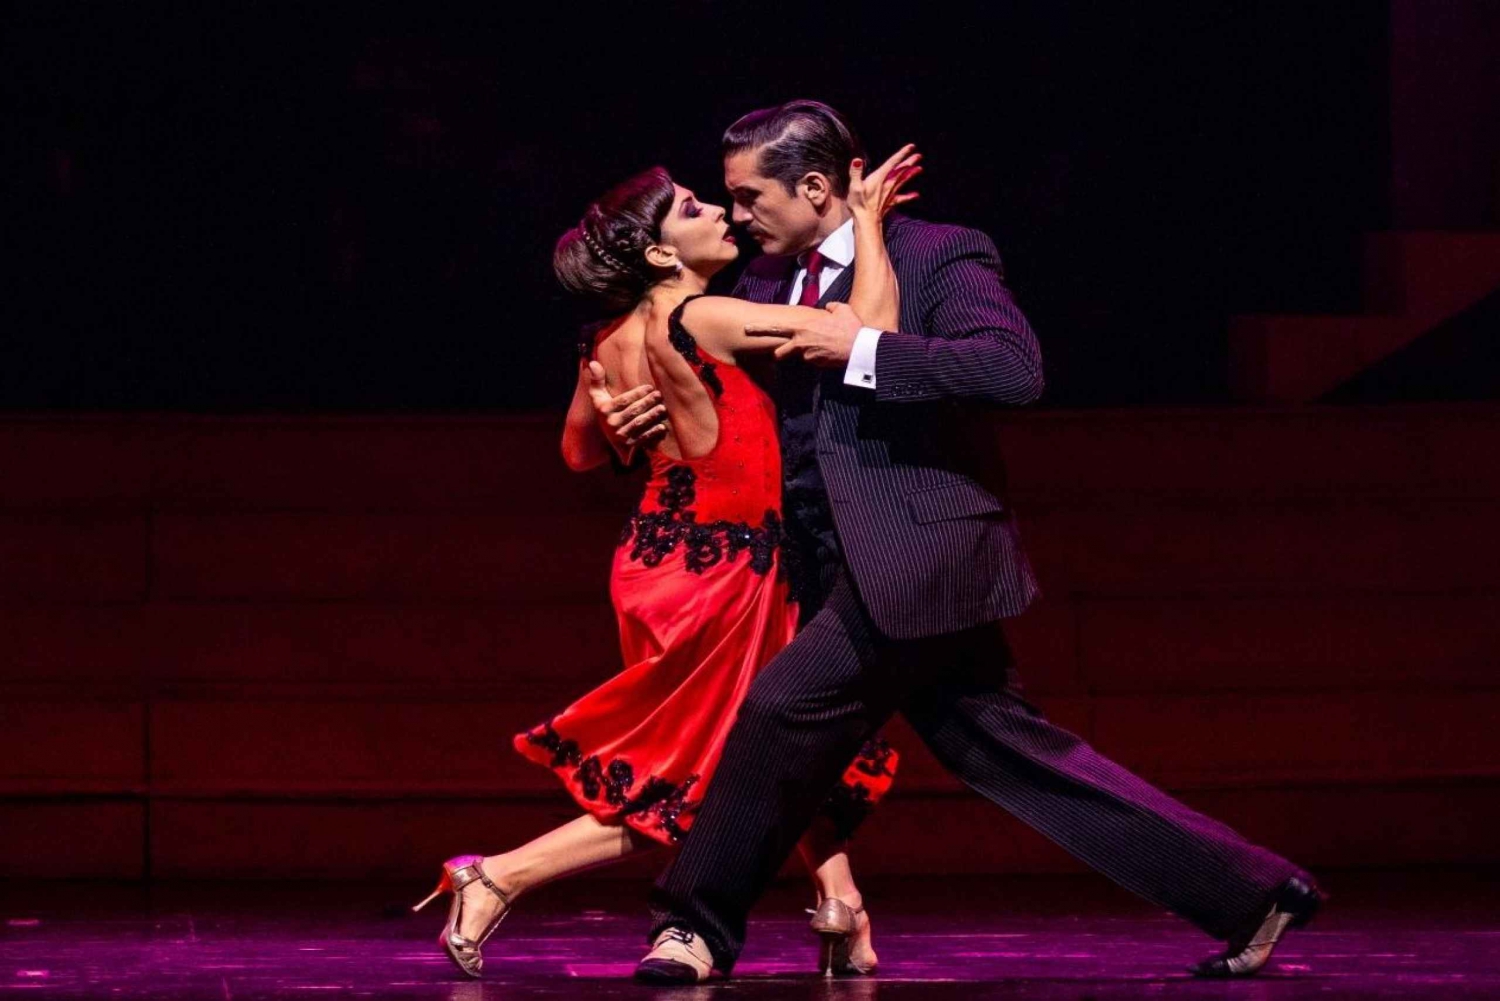 Buenos Aires: Tango Porteño Show with Optional Dinner